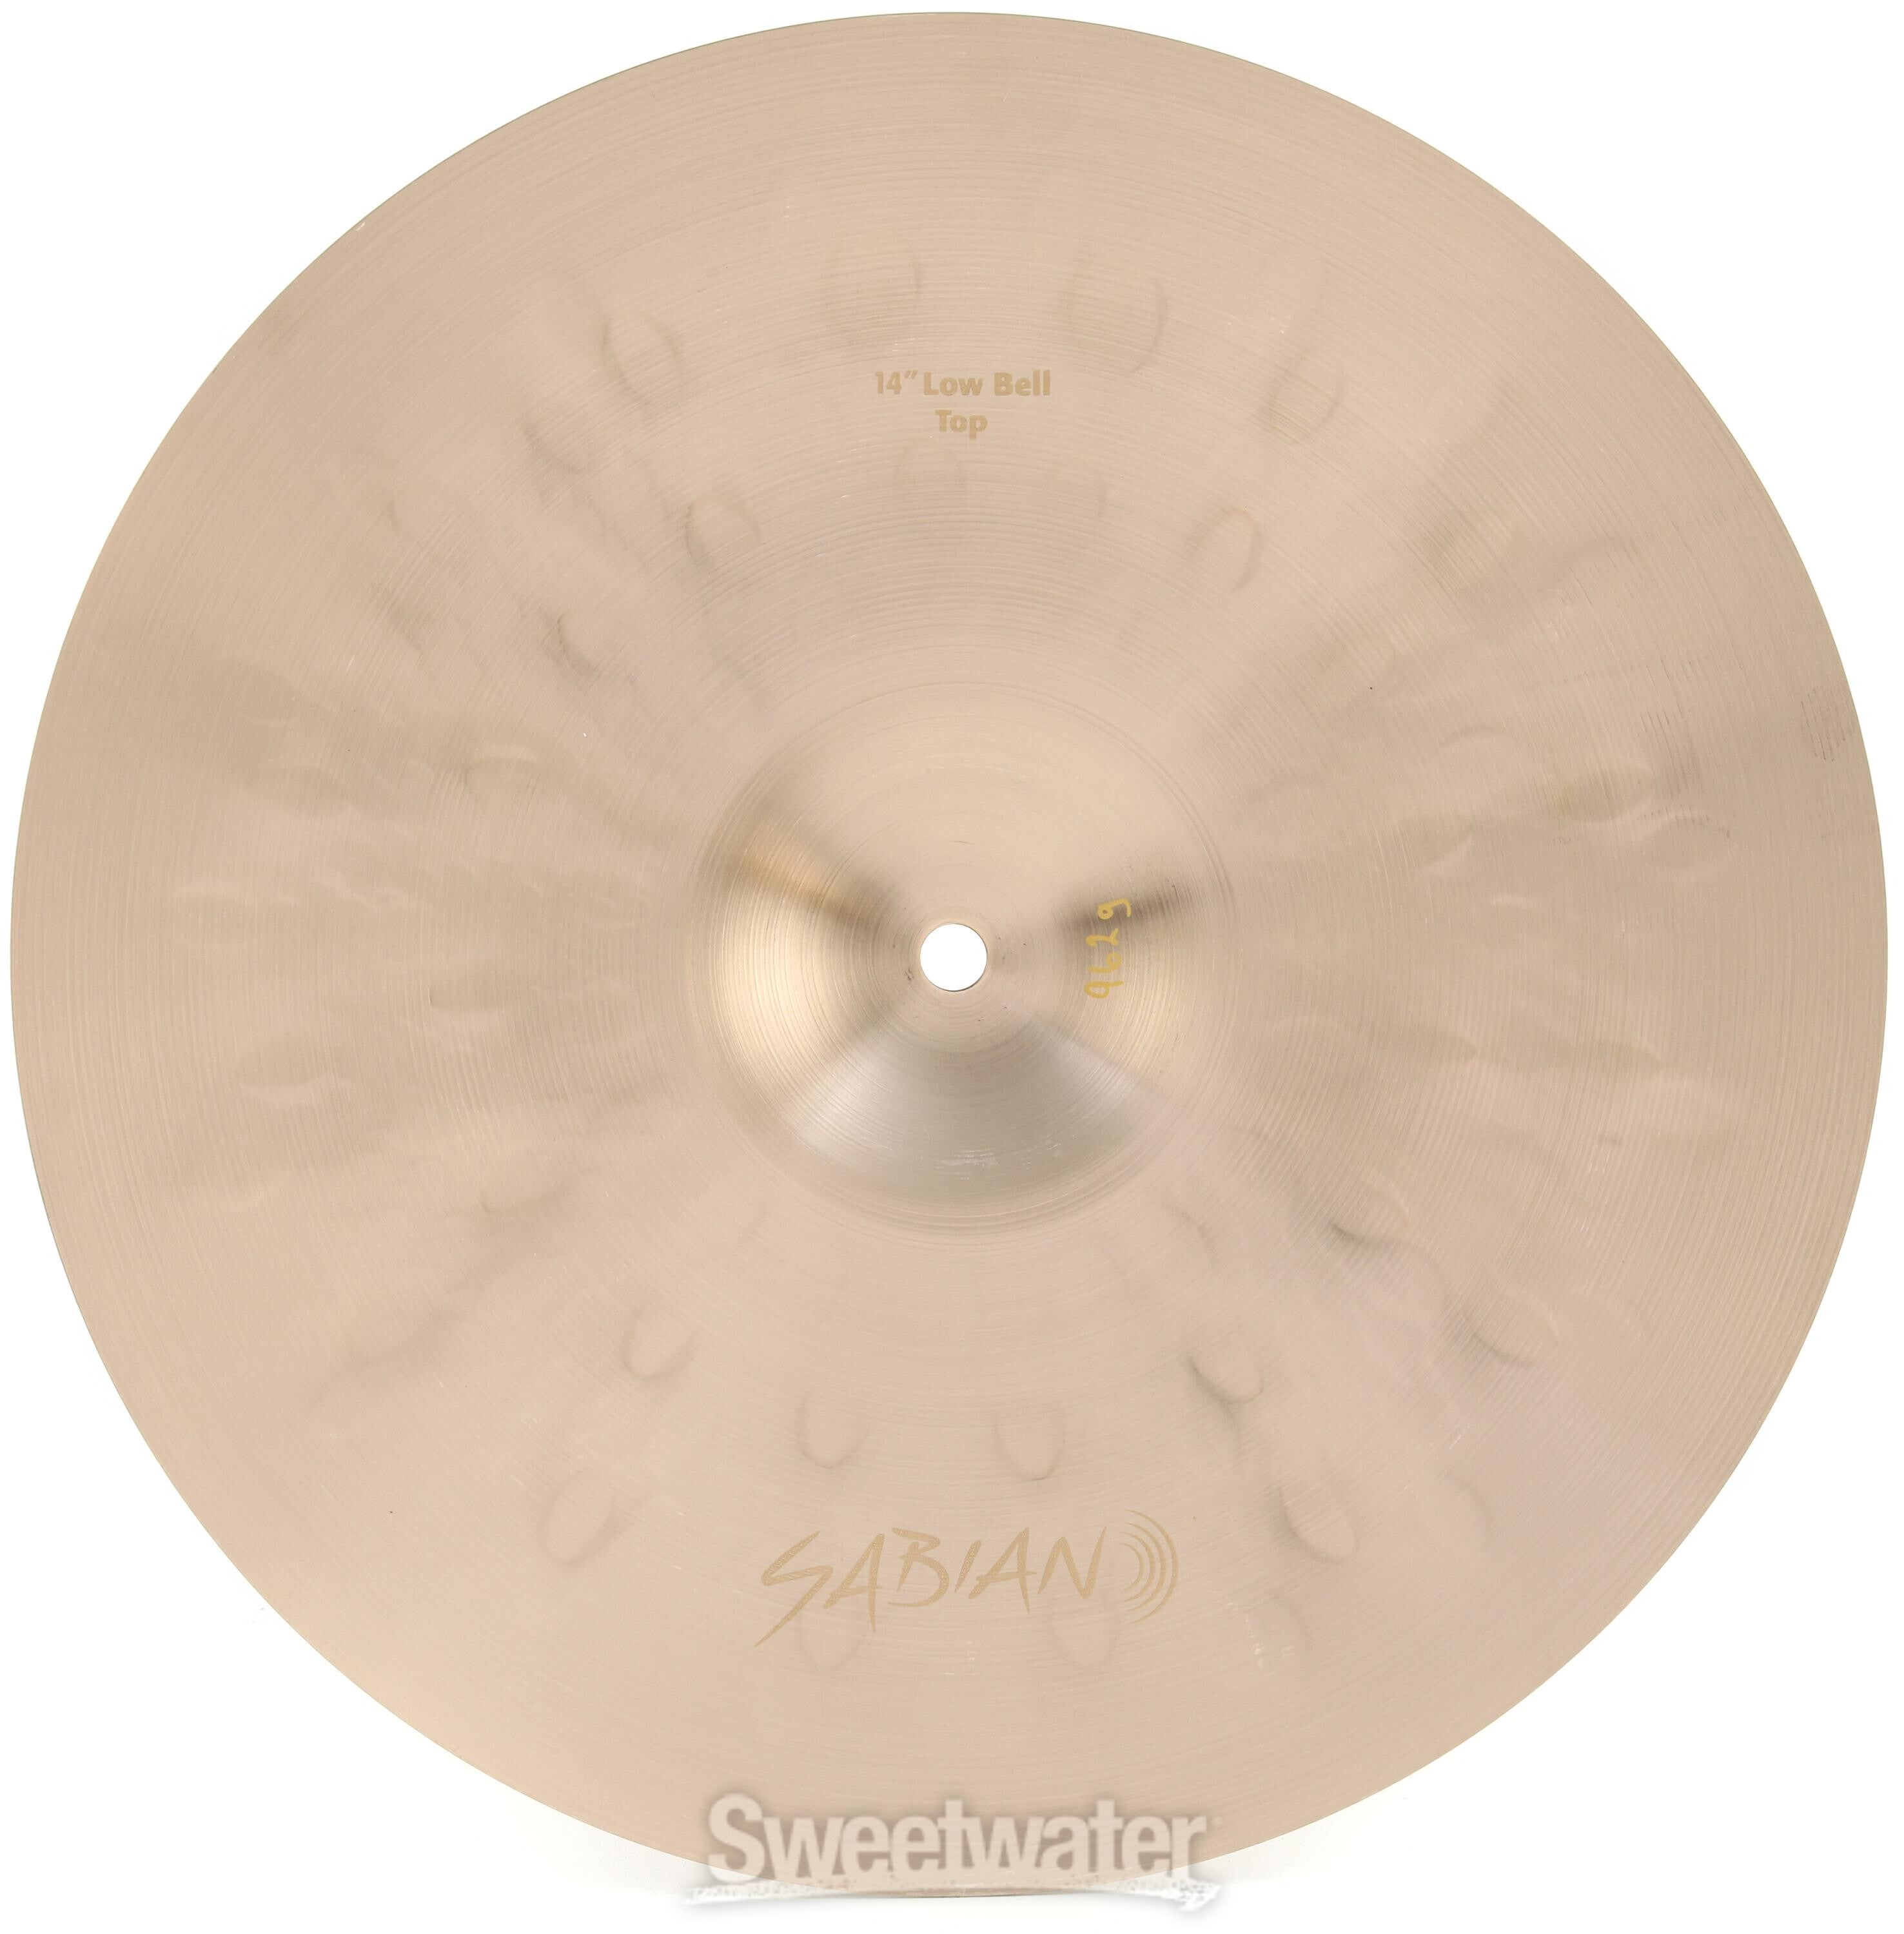 Sabian HHX Anthology Hi-hat Cymbals - 14-inch, Low Bell | Sweetwater